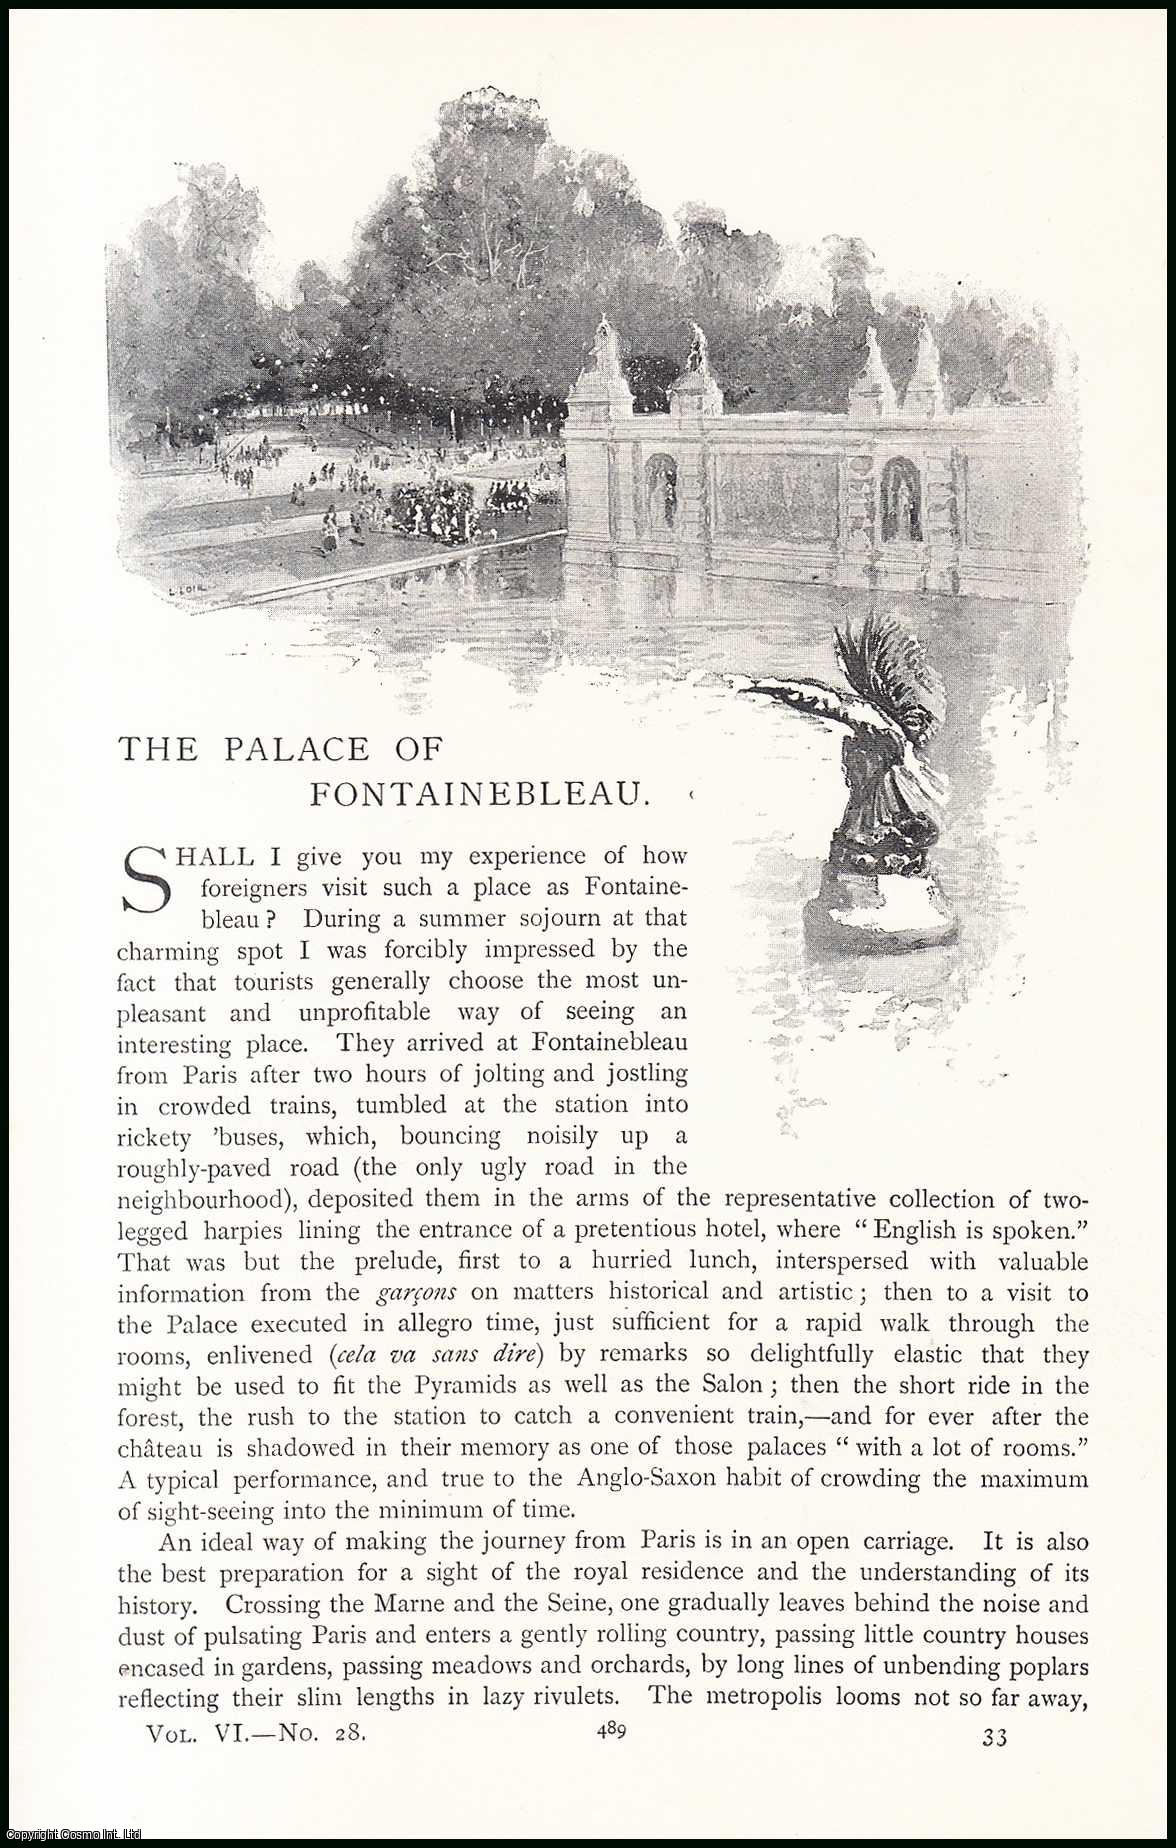 August F. Jaccaci - The Palace of Fontainebleau, France. An uncommon original article from the Pall Mall Magazine, 1895.